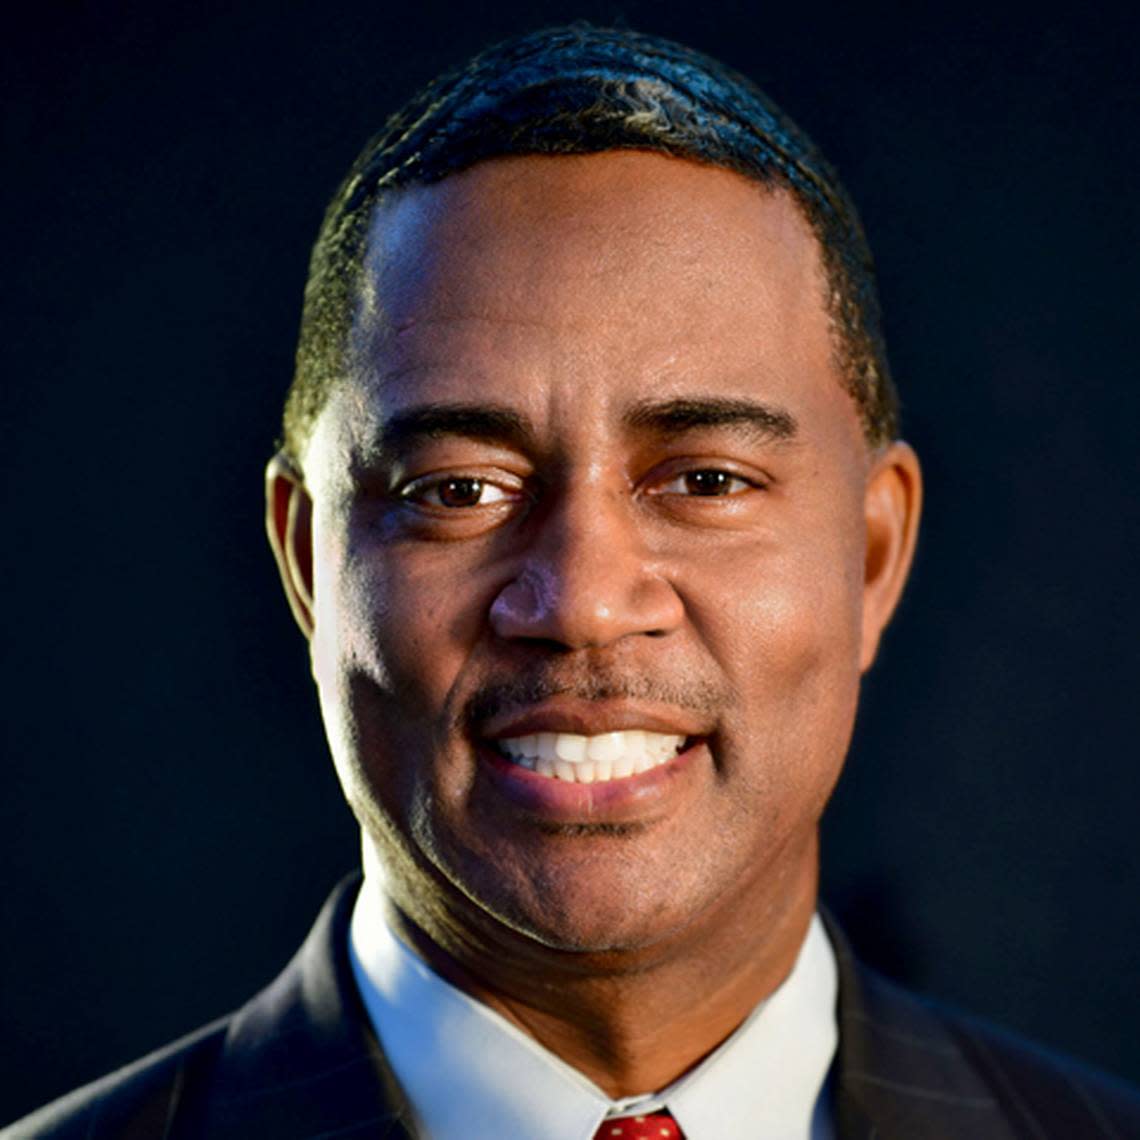 Robert Mock, Jr. is one of three finalists for the president of Kentucky State University. He is currently the executive vice president strategic initiatives and chief of staff at the University of Maryland Eastern Shore.